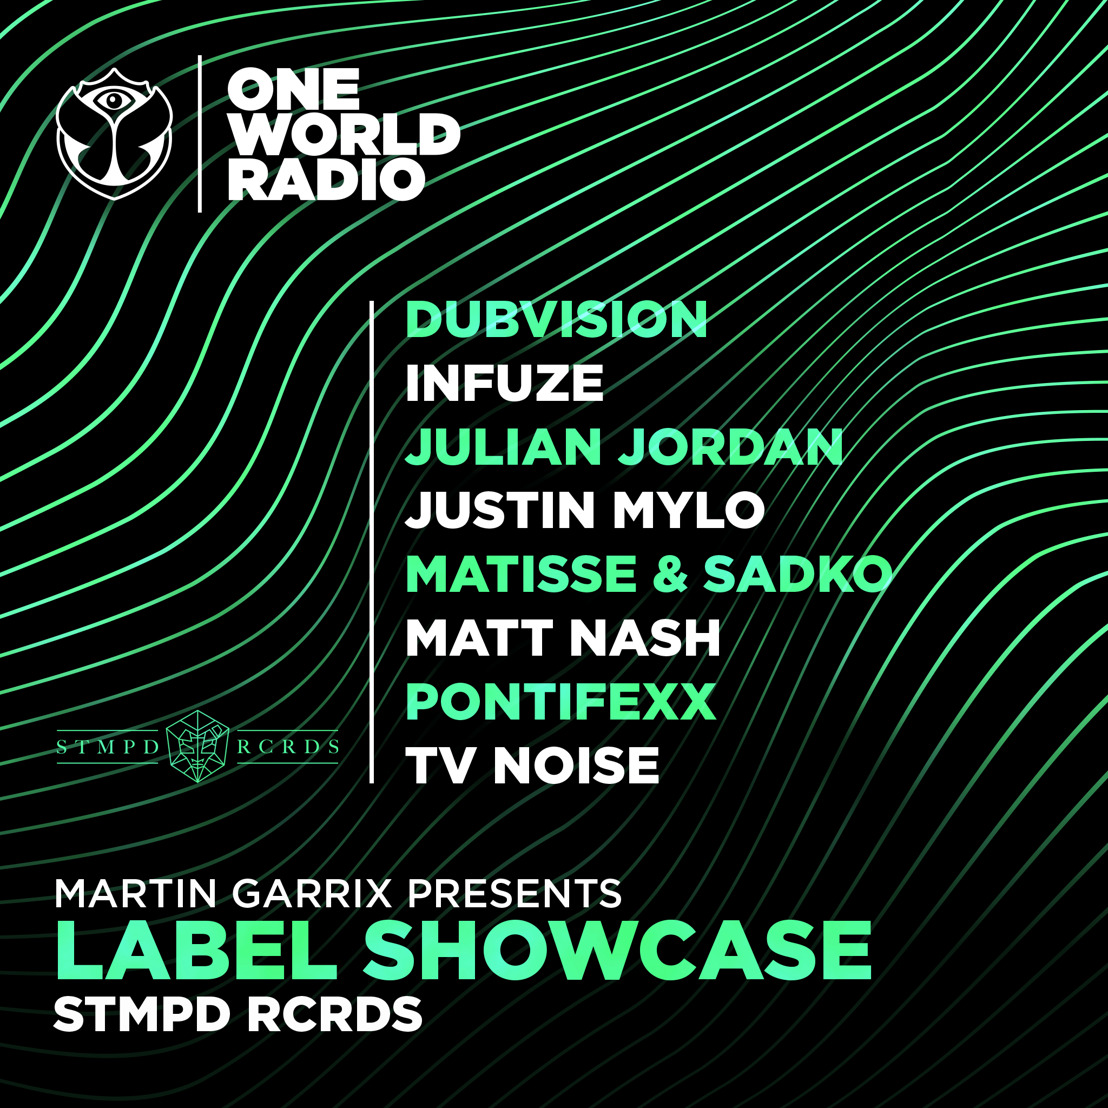 Martin Garrix’s STMPD RCRDS takes over One World Radio